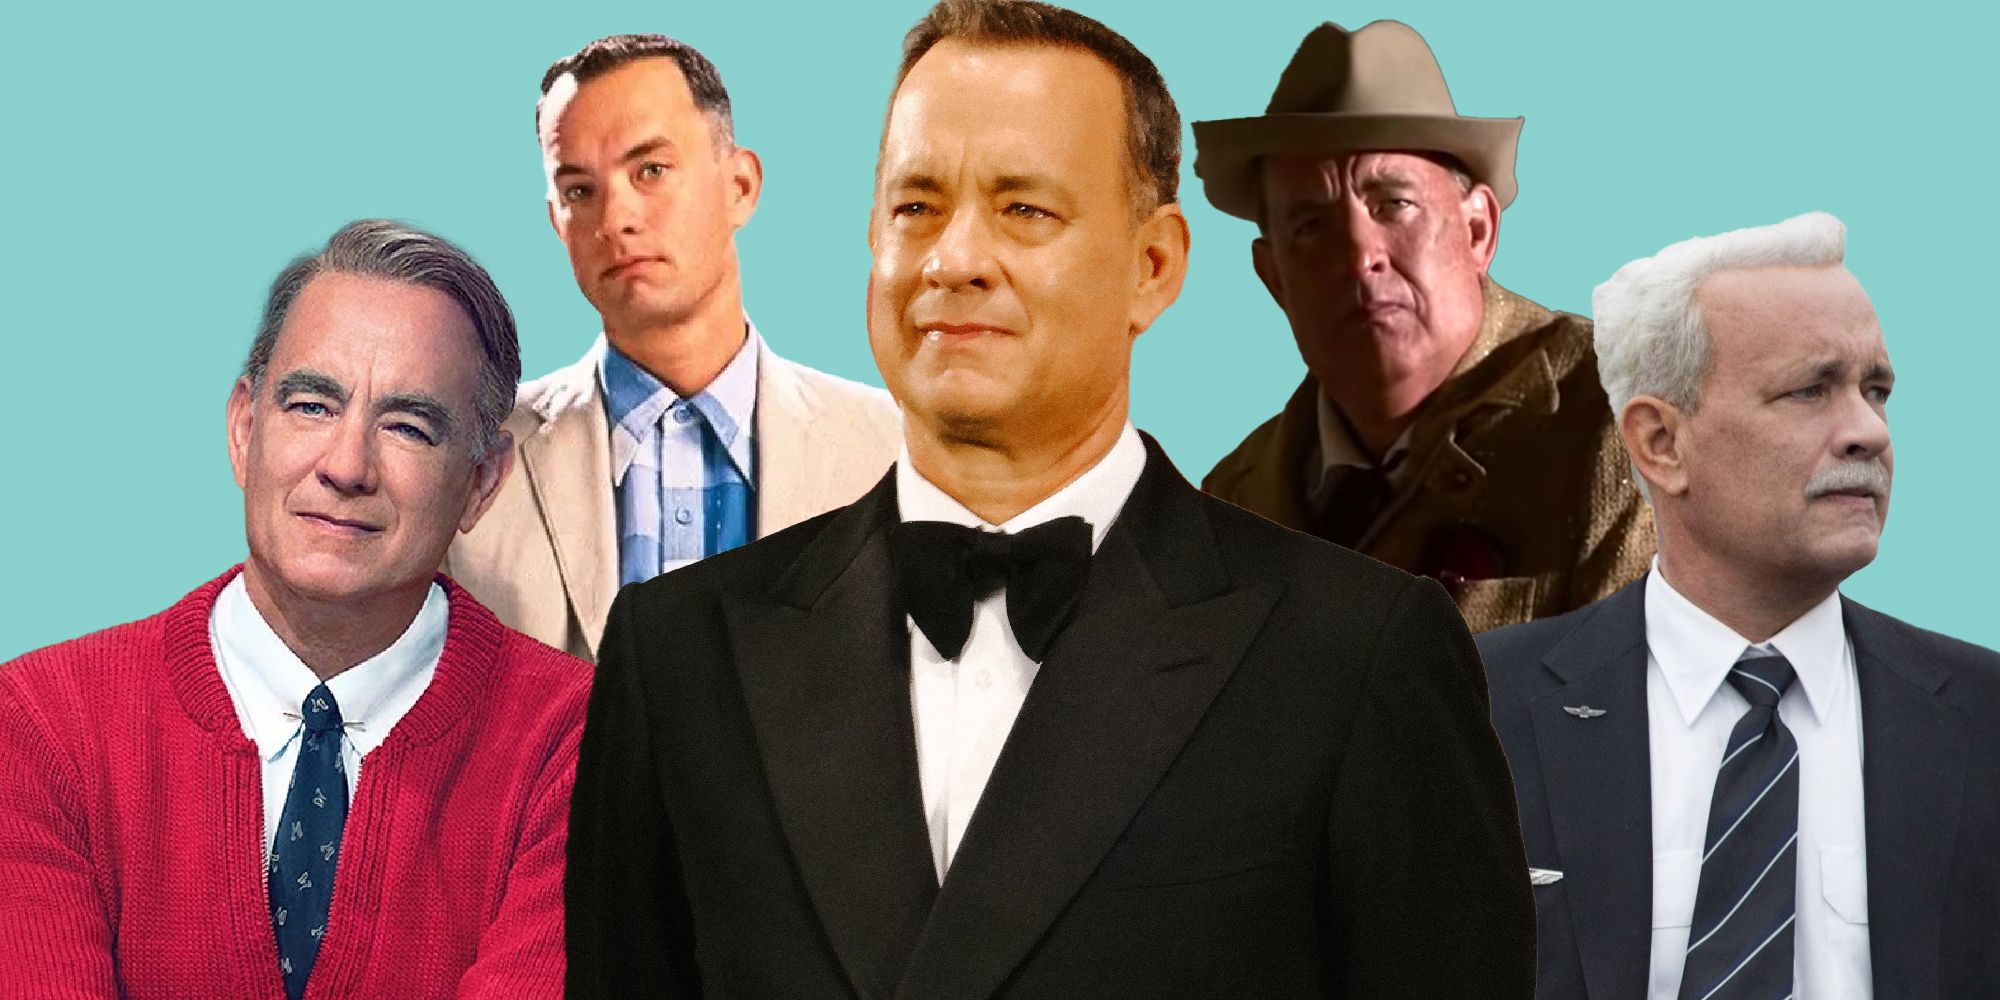 Tom Hanks in A Beautiful Day in the Neighborhood, Forrest Gump, Elvis, and Sully, with IRL Tom Hanks